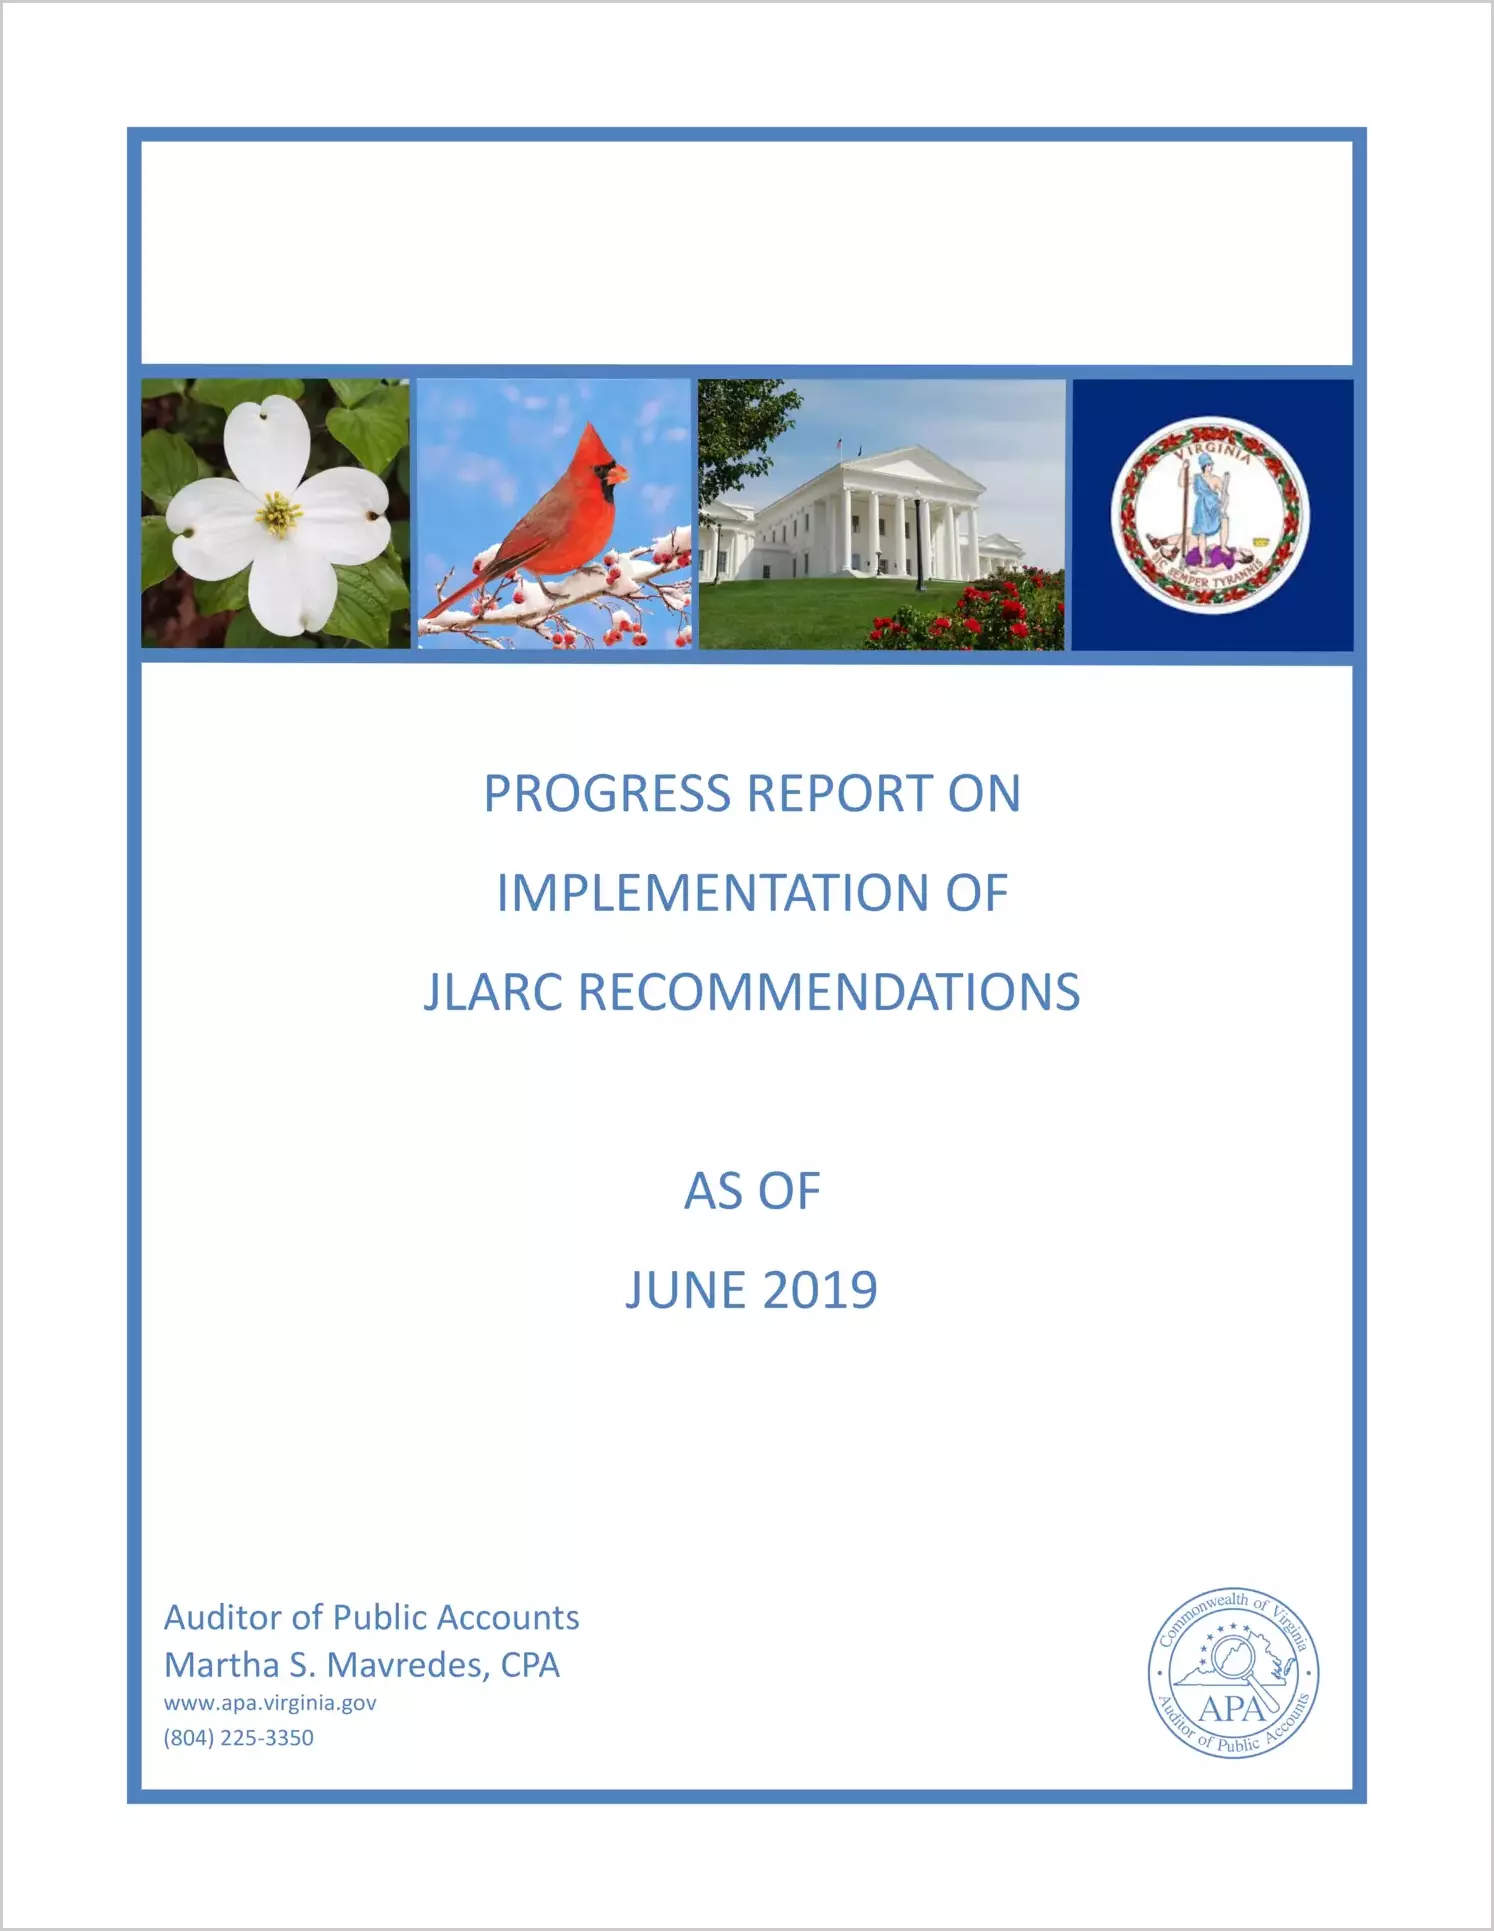 Progress Report on Implementation of JLARC Recommendations as of June 2019